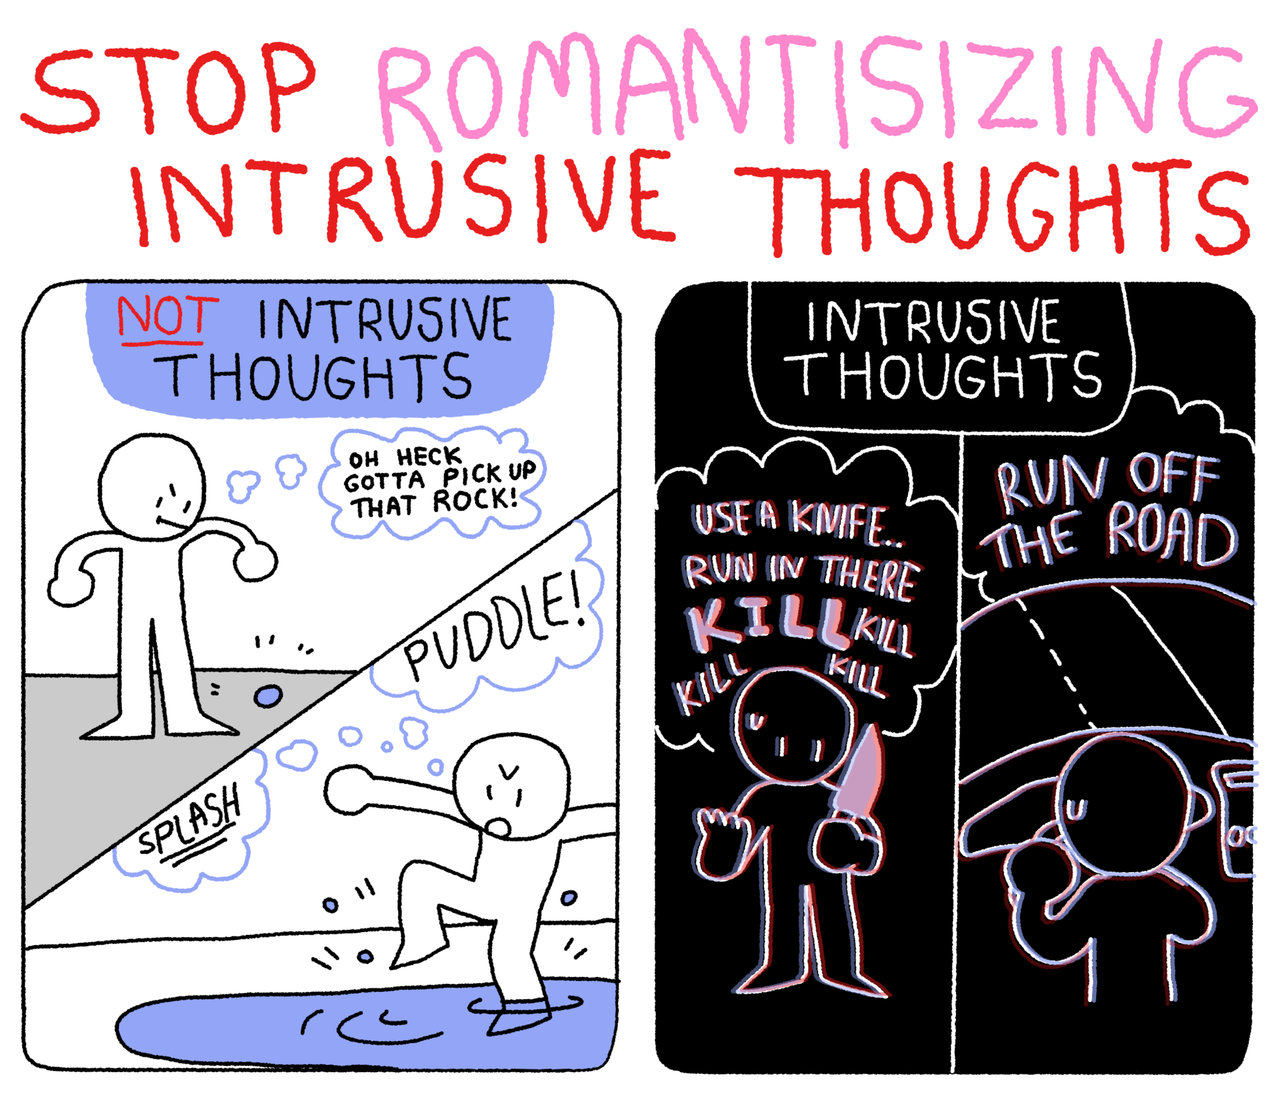 intrusive thoughts